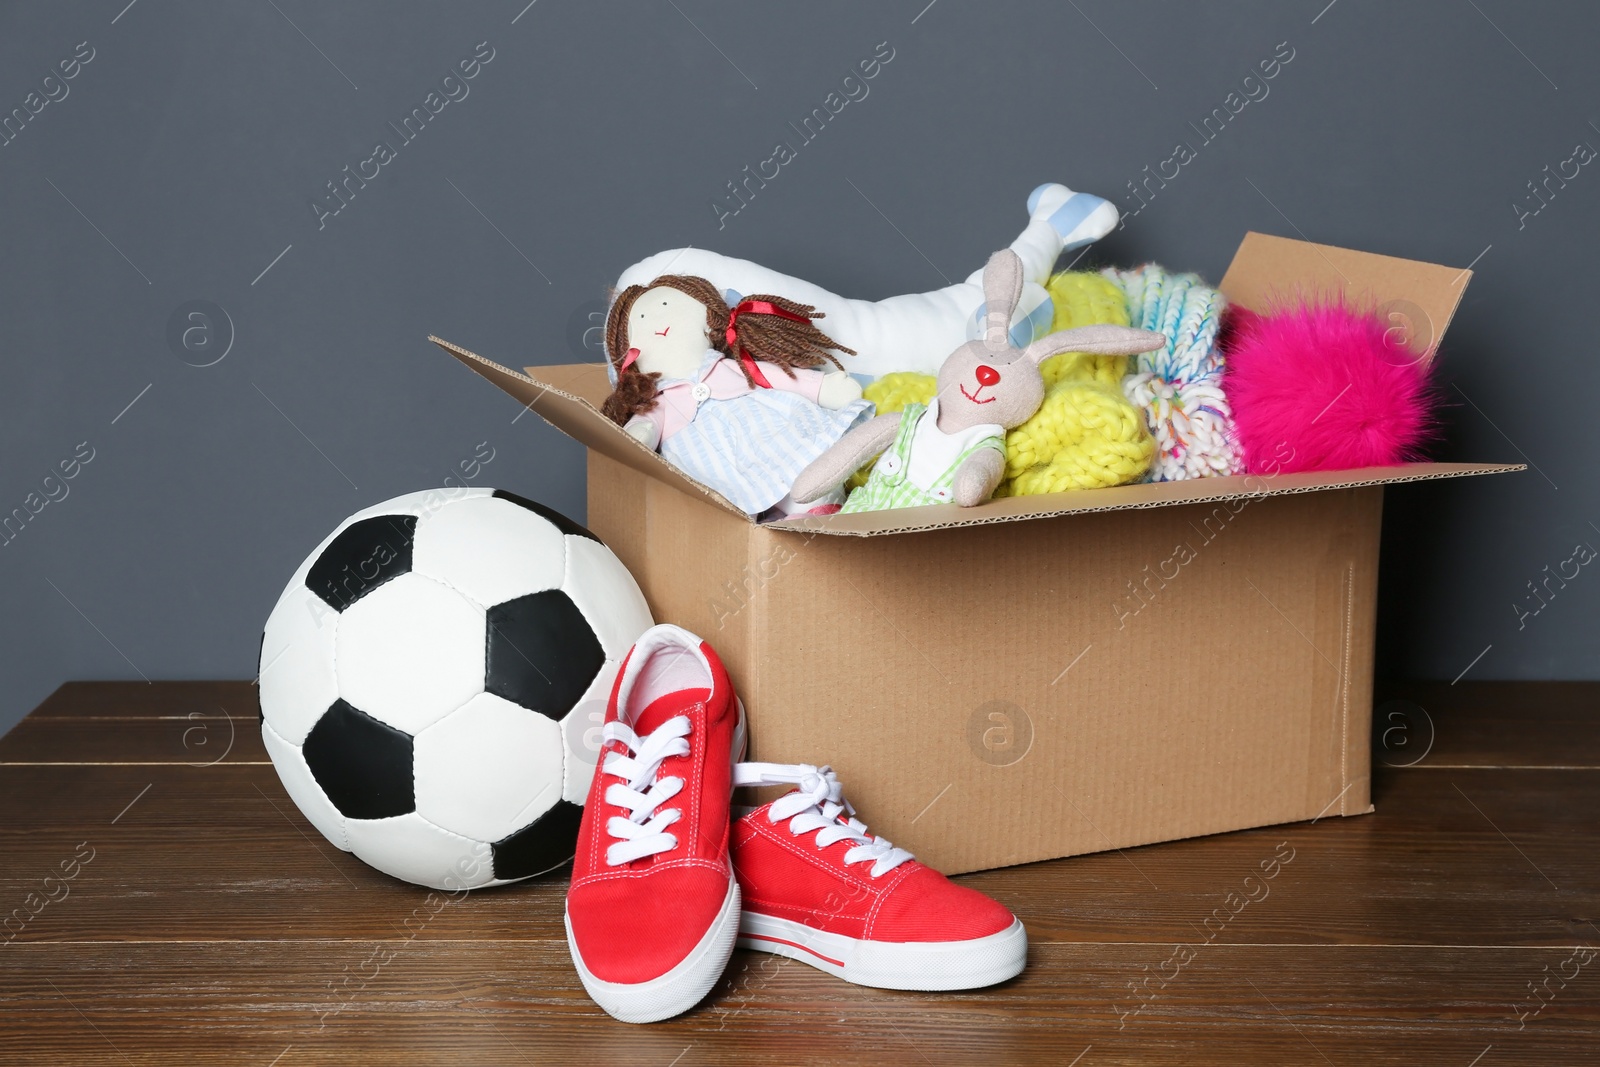 Photo of Donation box, shoes, toys and clothes on table near grey wall